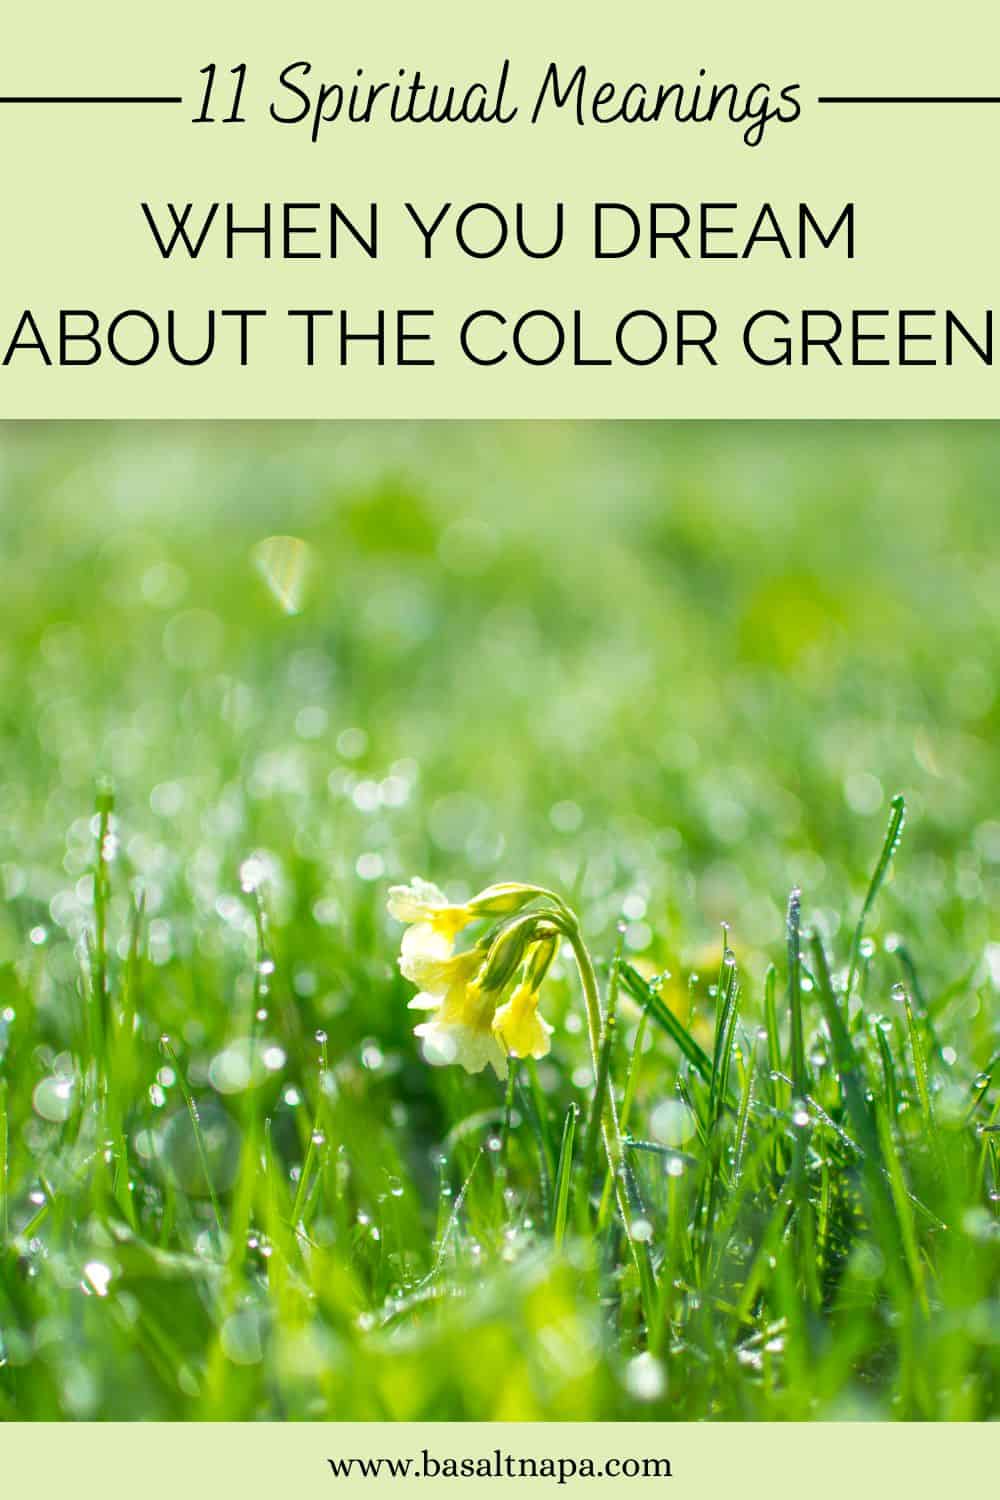 How to interpret a dream about the color green